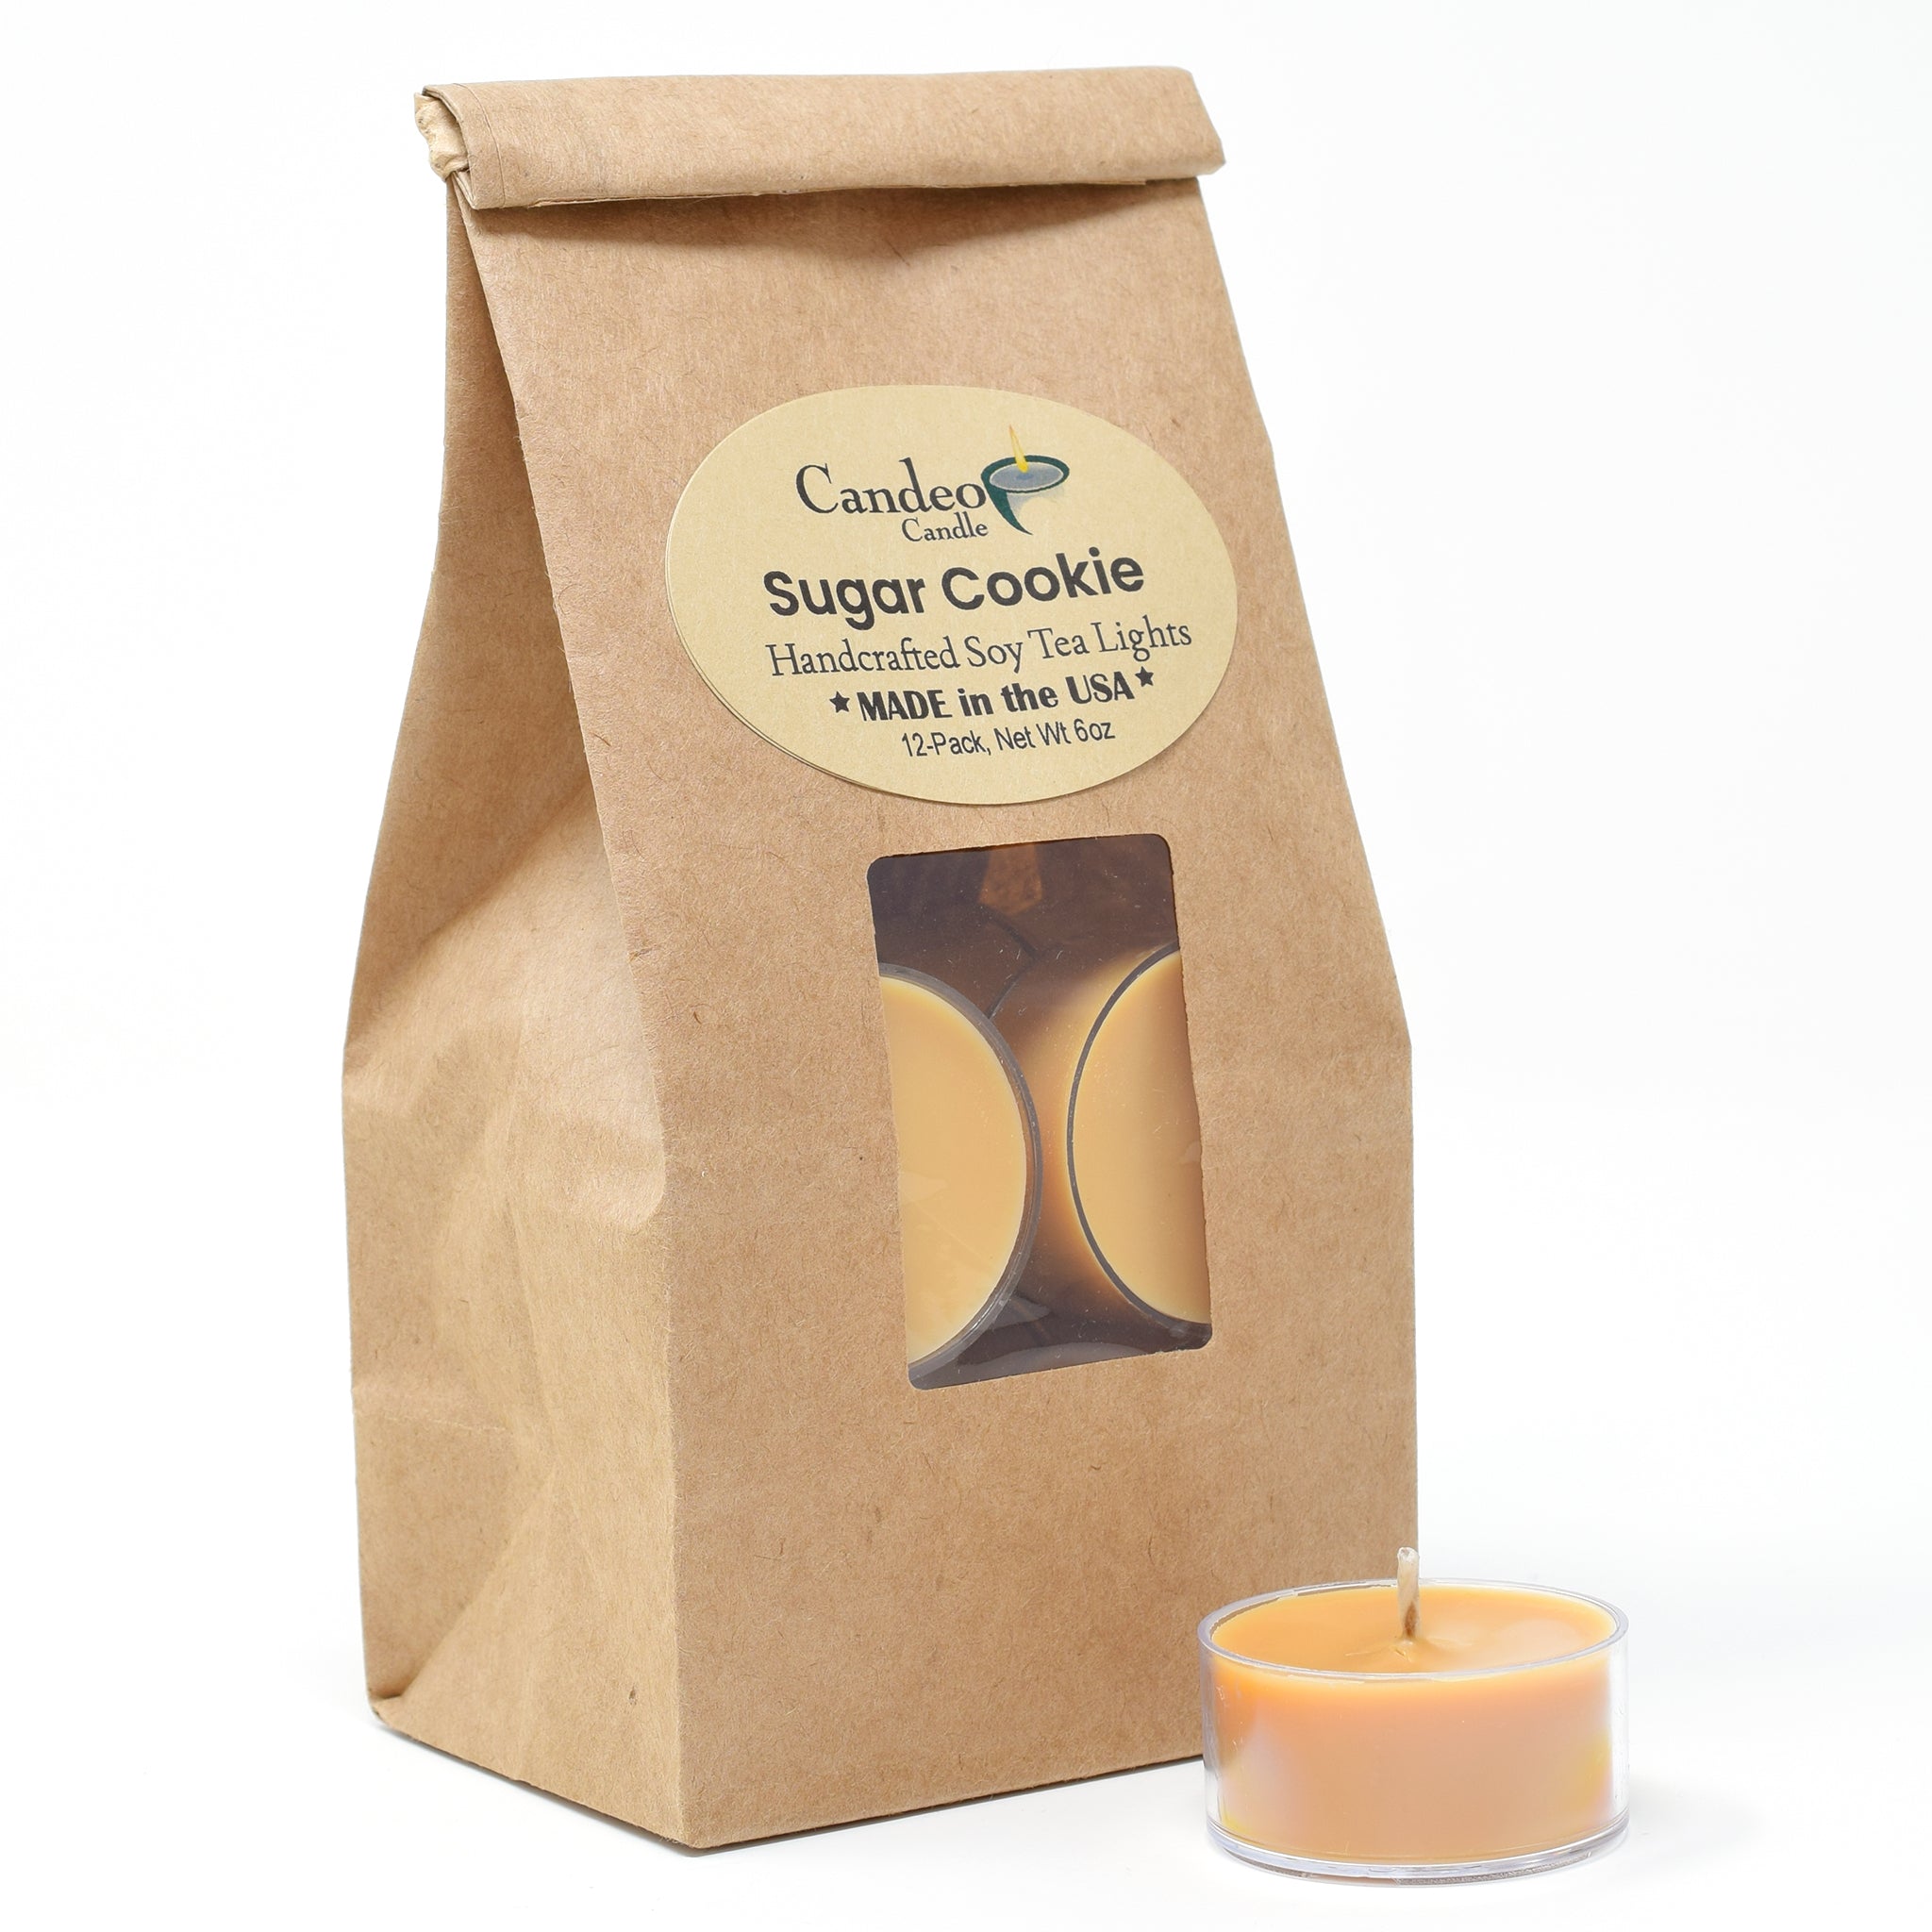 Sugar Cookie, Soy Tea Light 12-Pack - Candeo Candle